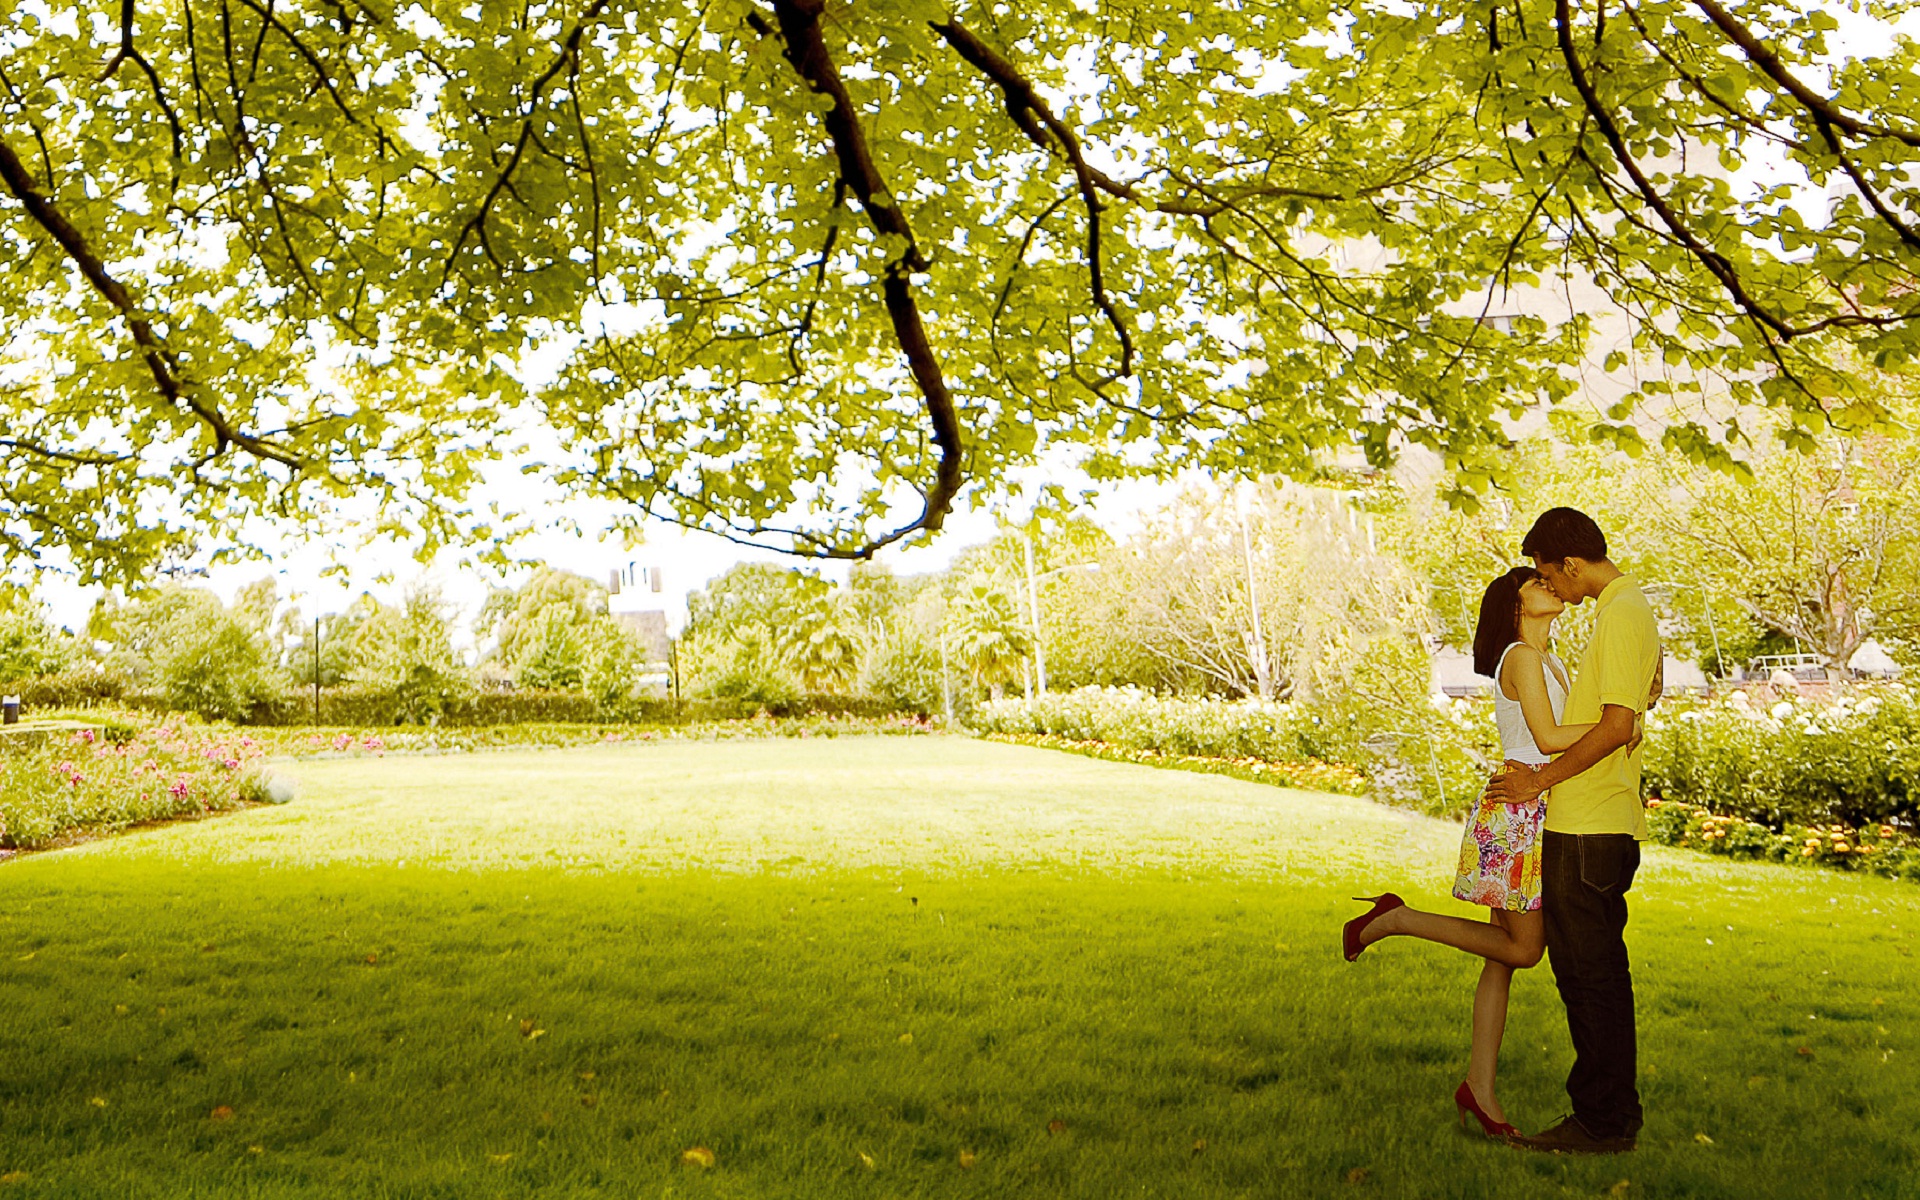 Kissing couple in park | HD Wallpapers Rocks